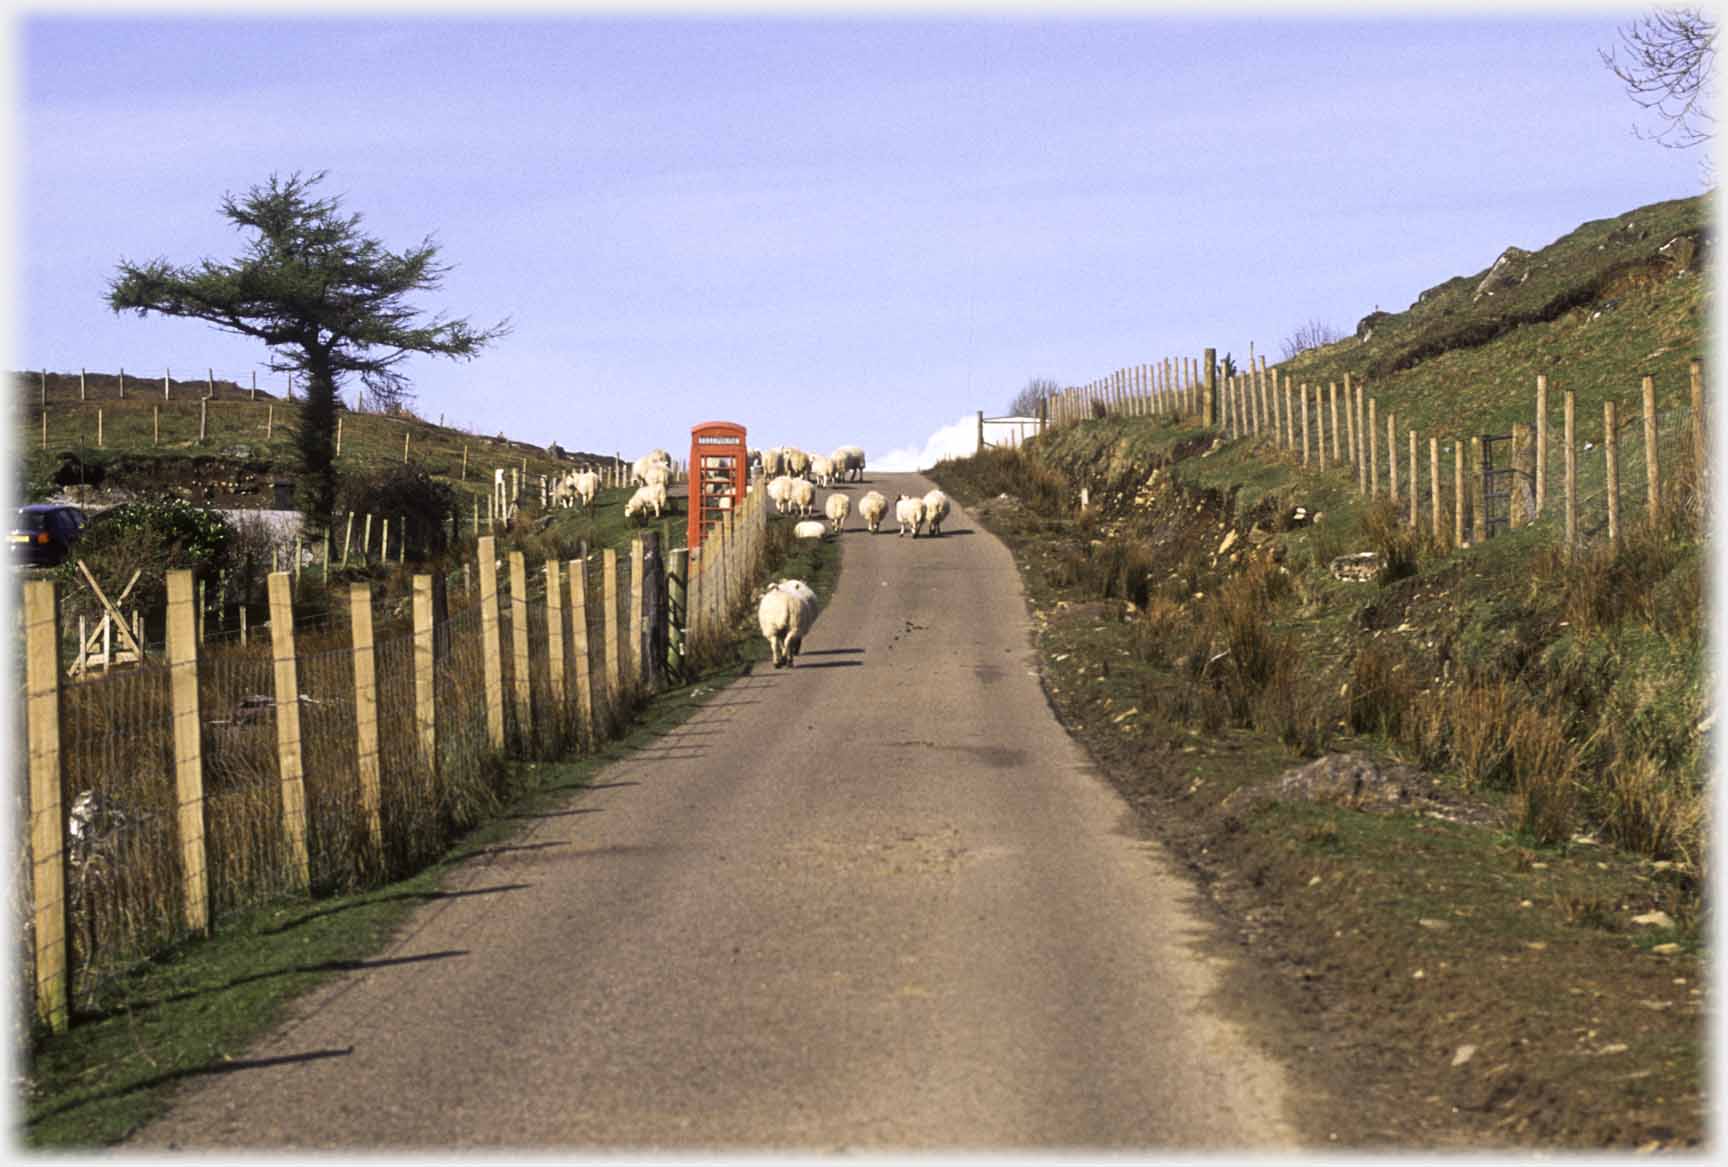 Road with phonebox and sheep passing.